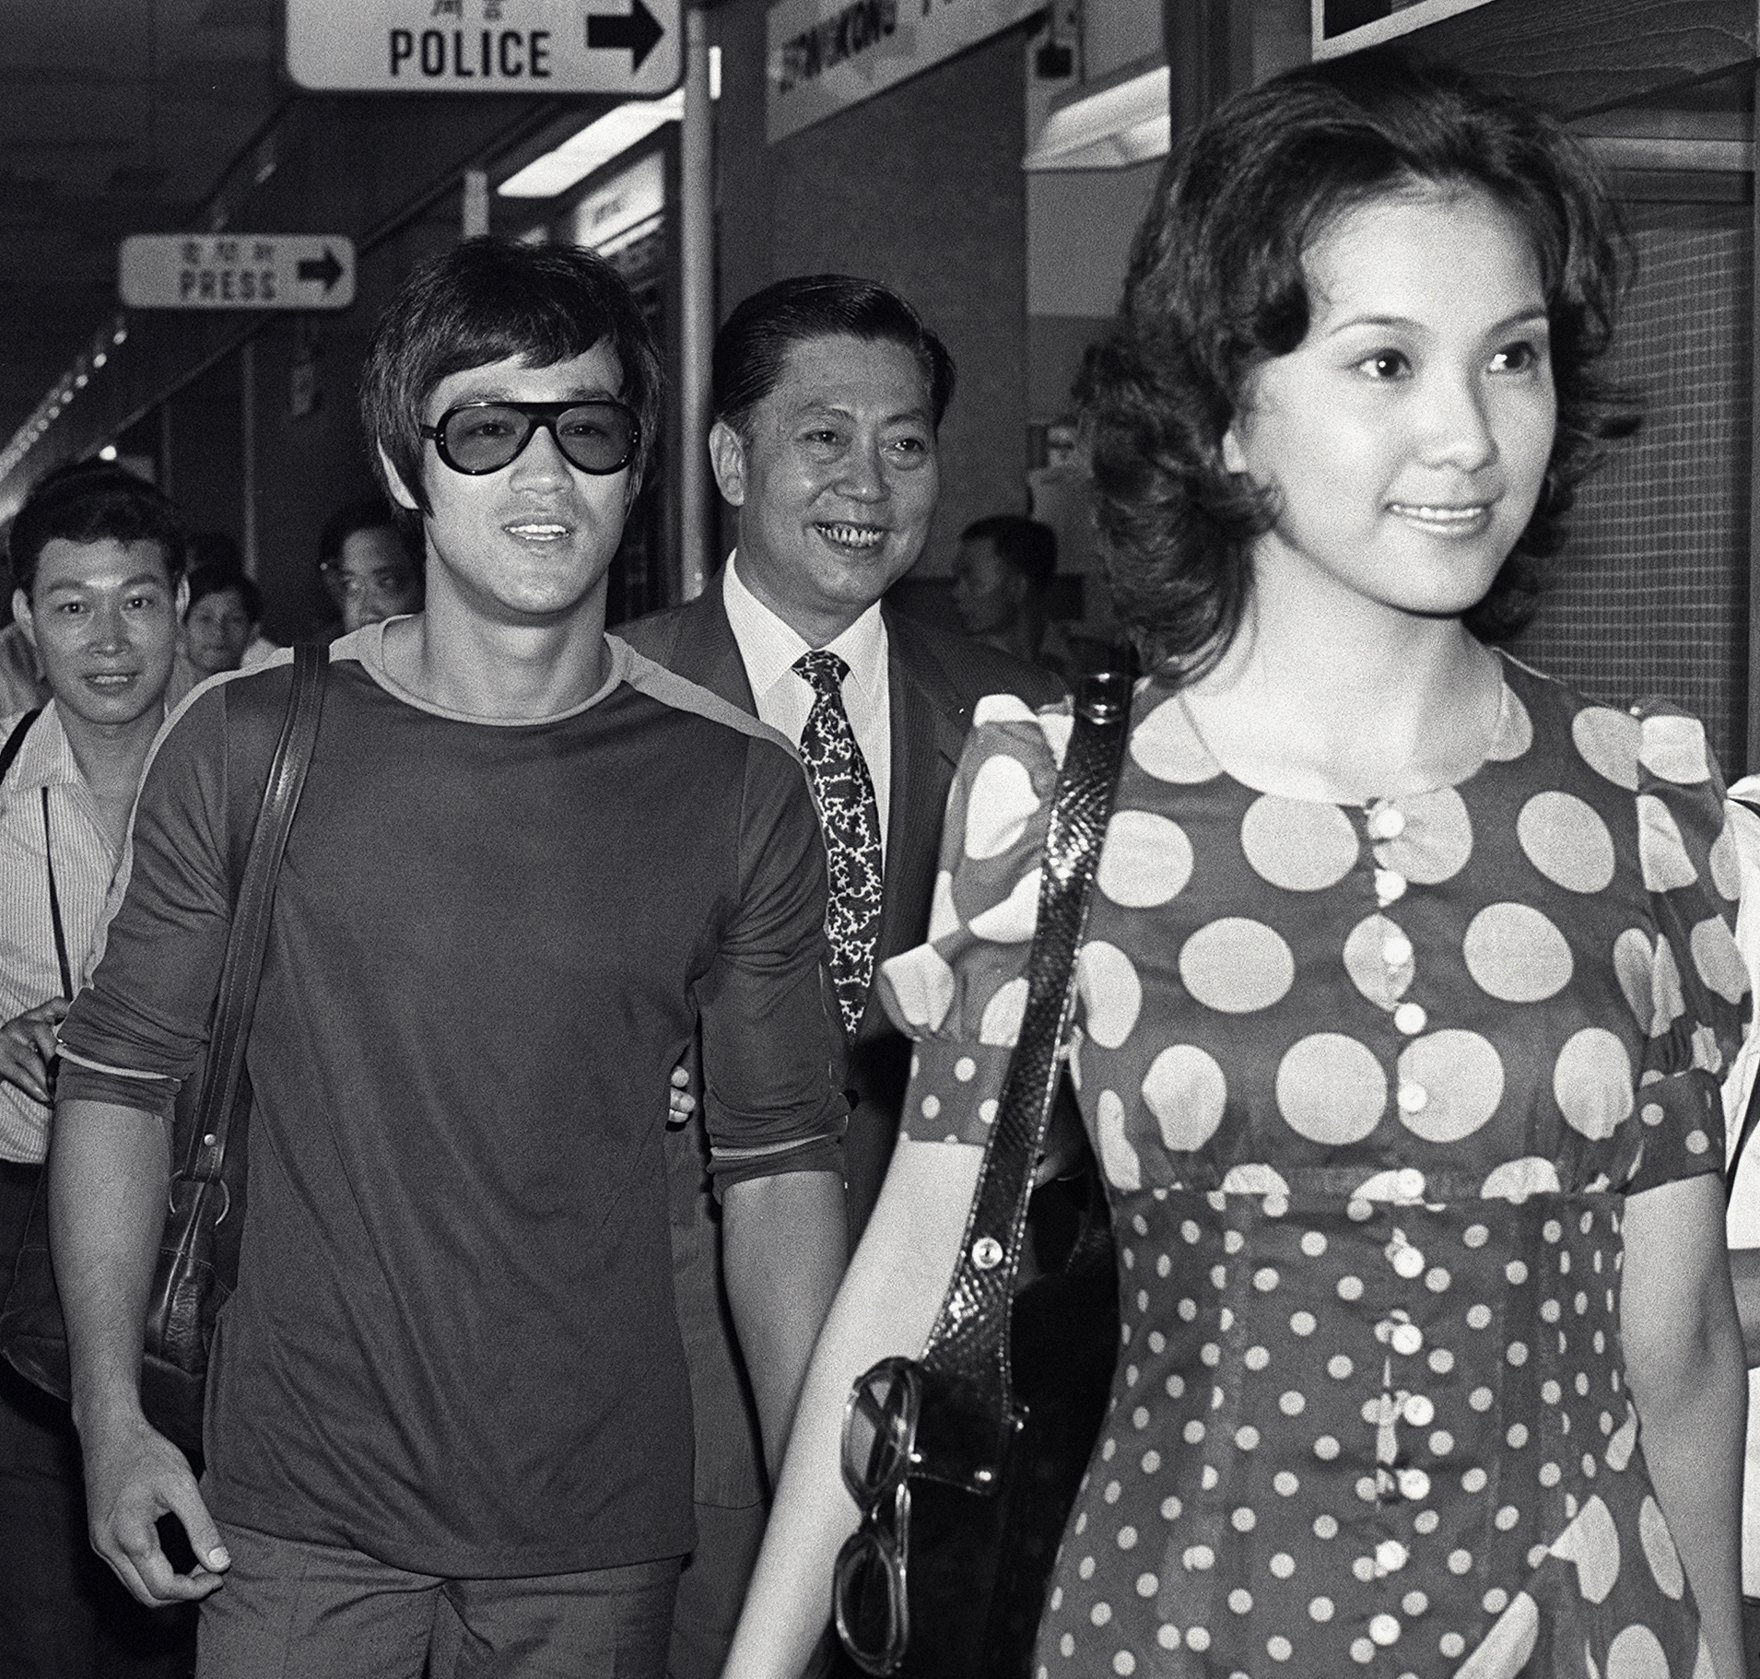 7 Bruce Lee Facts You May Not Know About